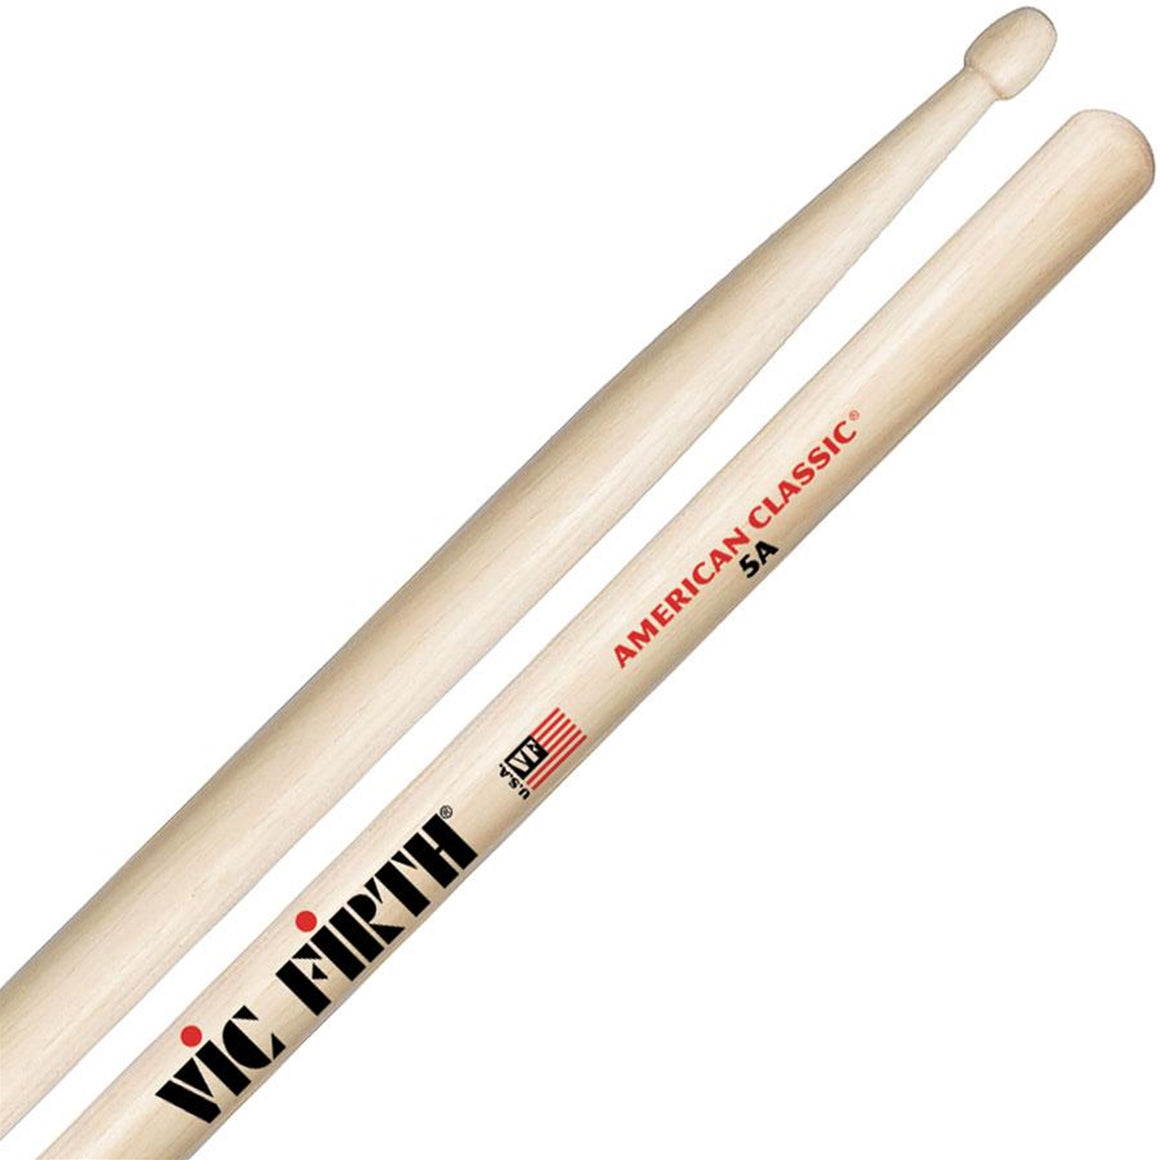 VIC FIRTH VF5A 5A American Classic Hickory Drumsticks, Wood Tip